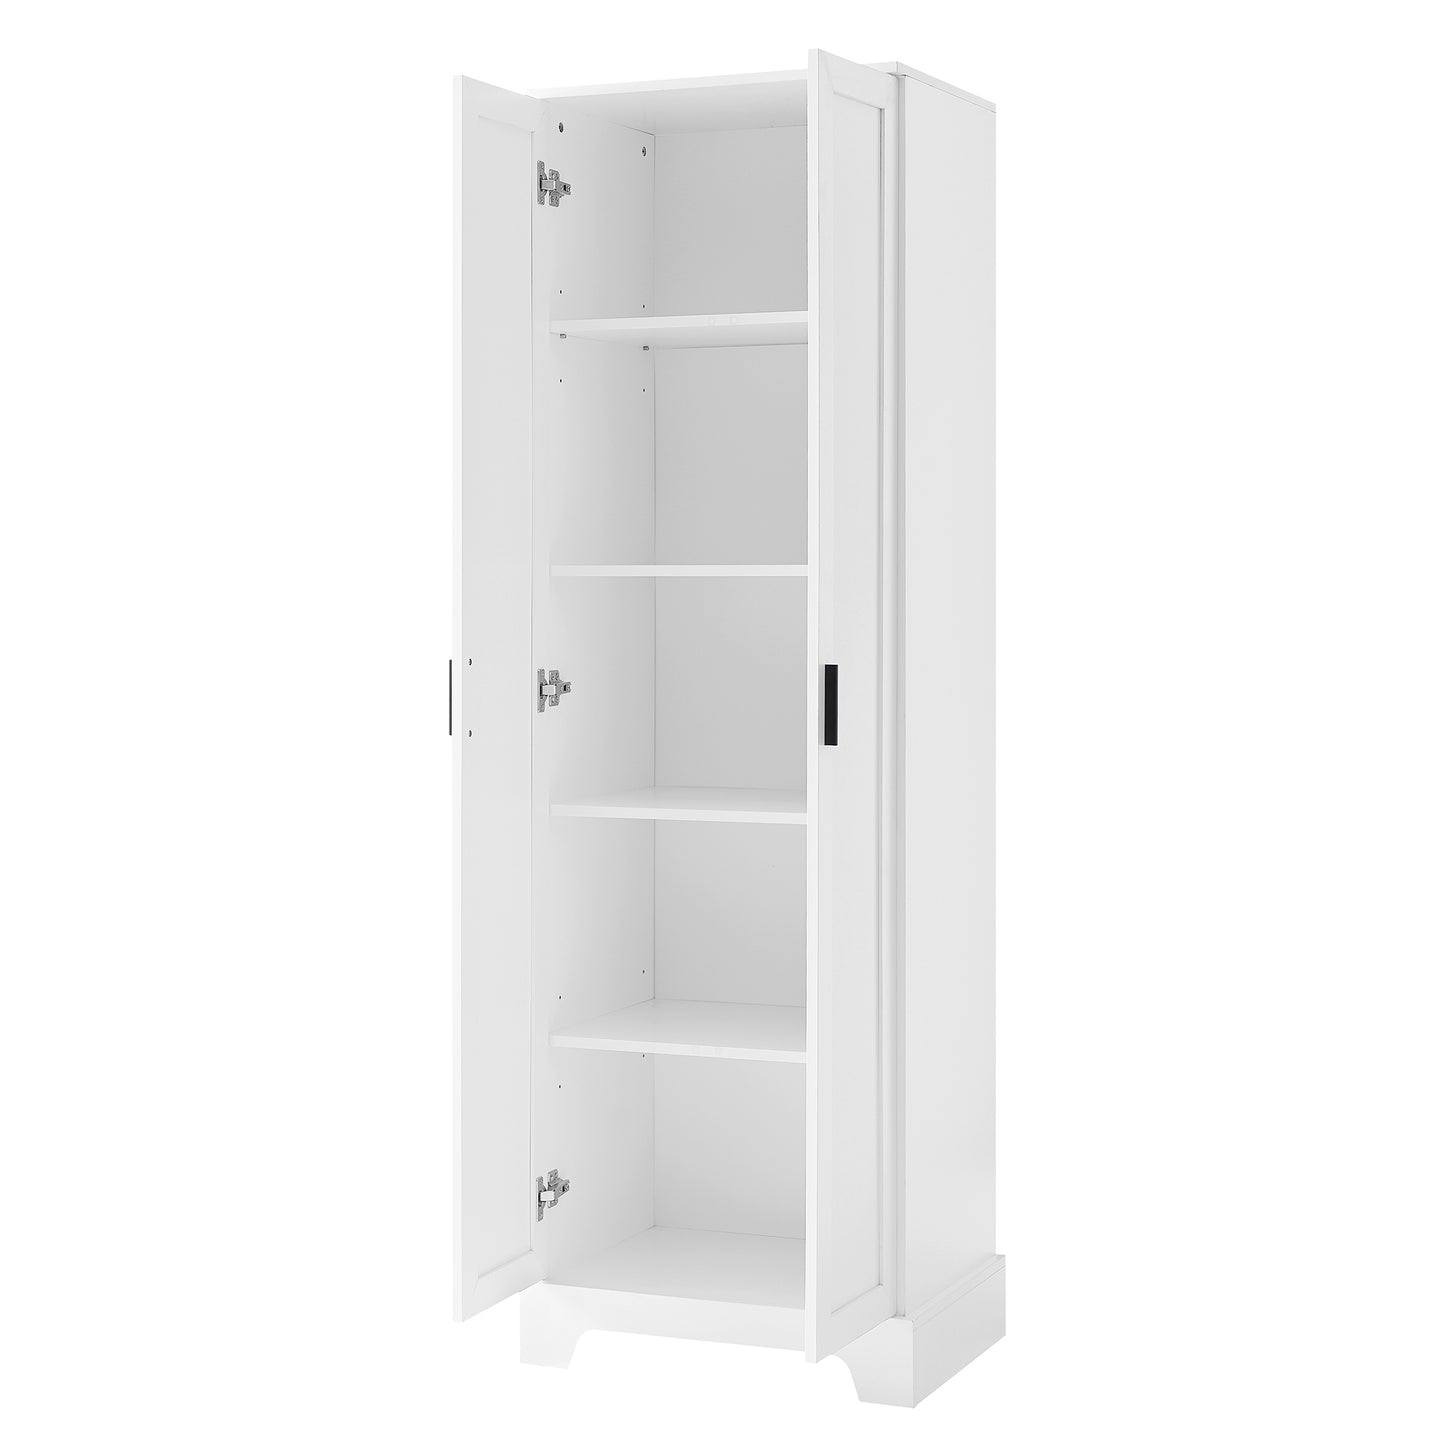 Bathroom Storage Cabinet with Two Doors, White